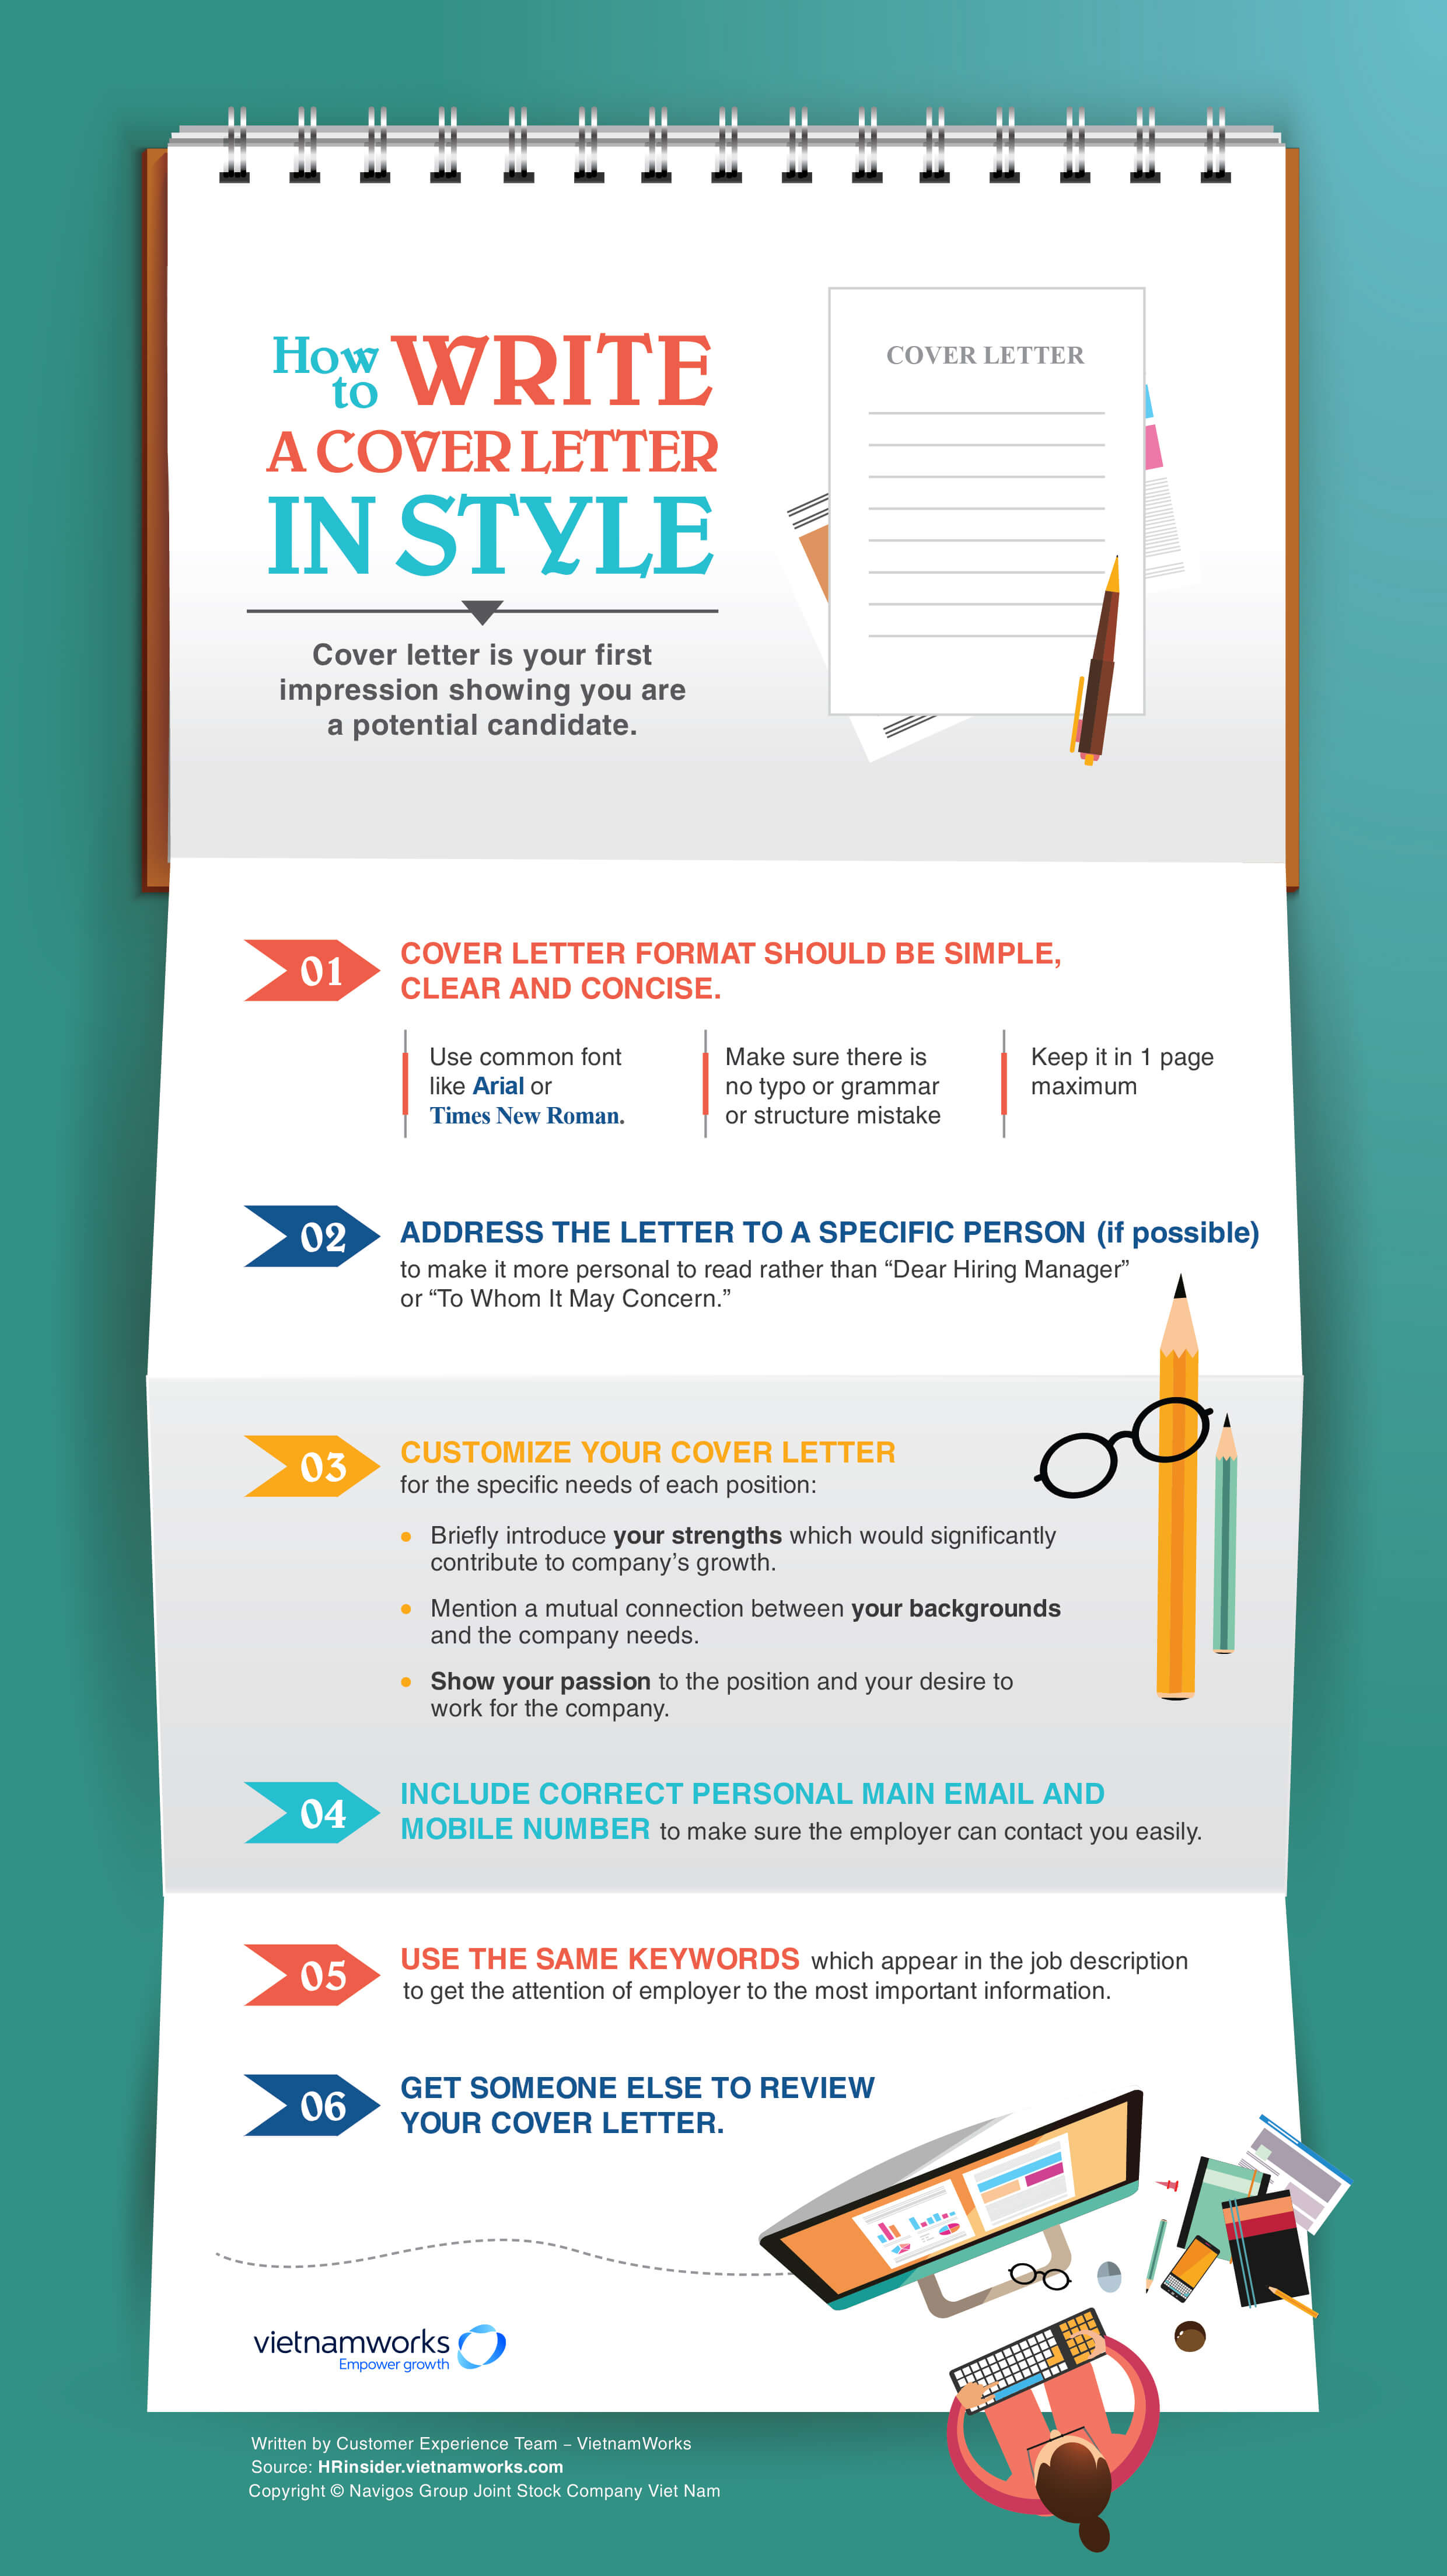 How To Write a Cover Letter in Style